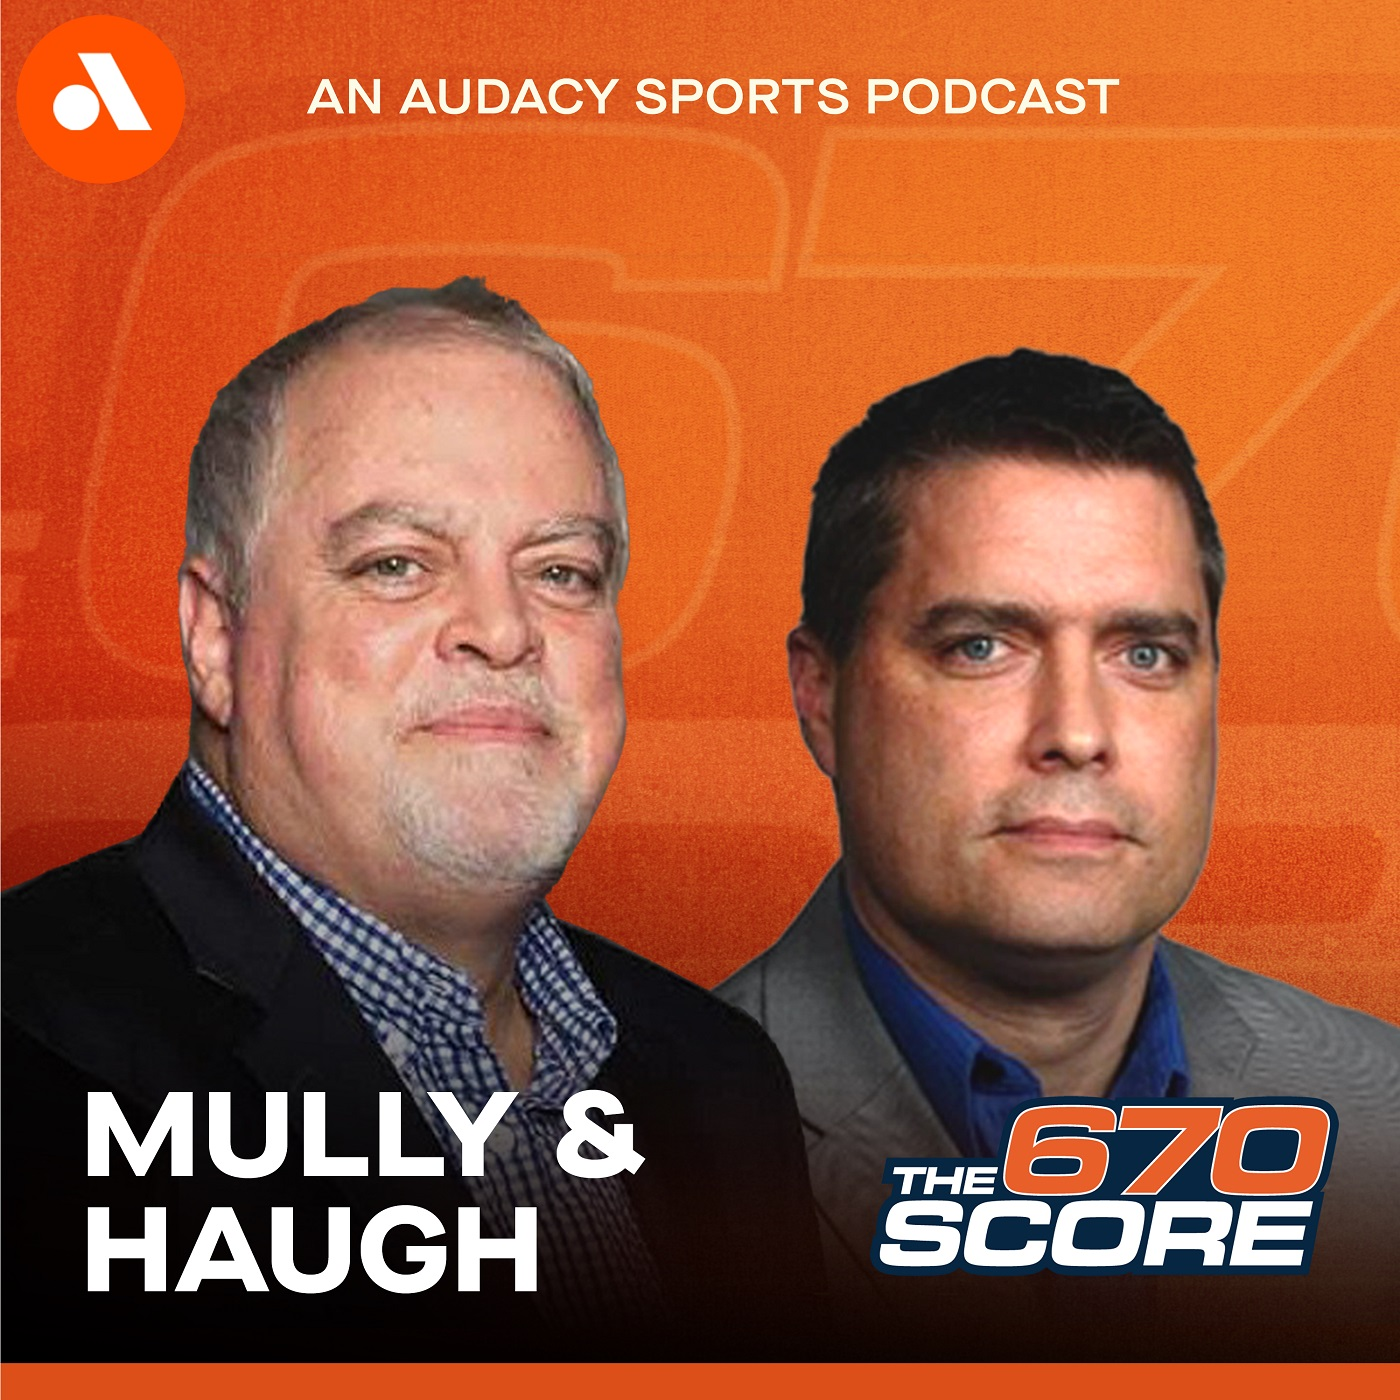 It's a big day in Chicago sports on 670 The Score (Hour 1)